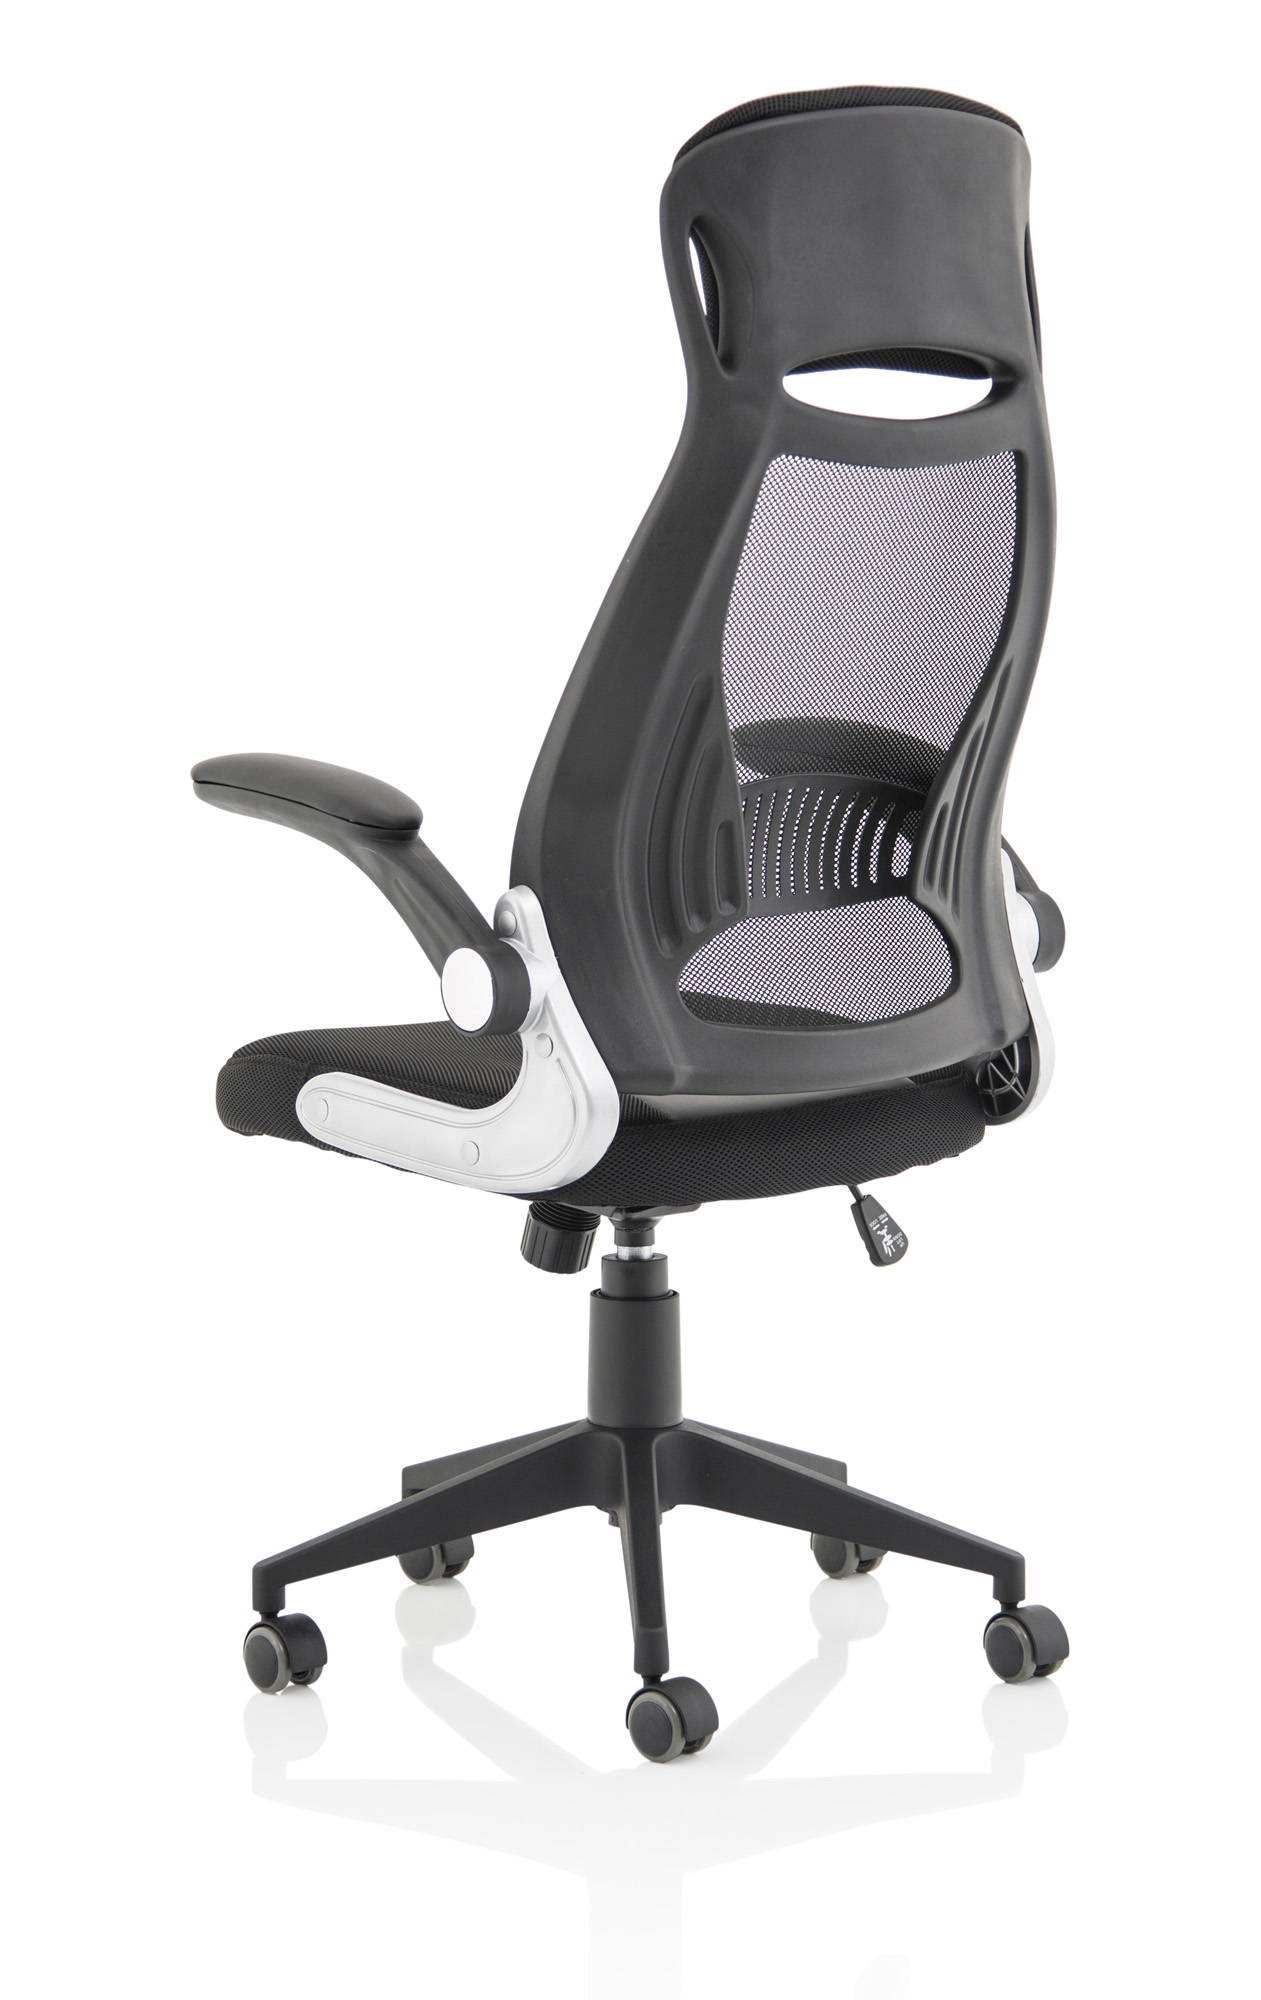 Affordable Saturn High Back Executive Mesh Chair Fold Up Arms Black 